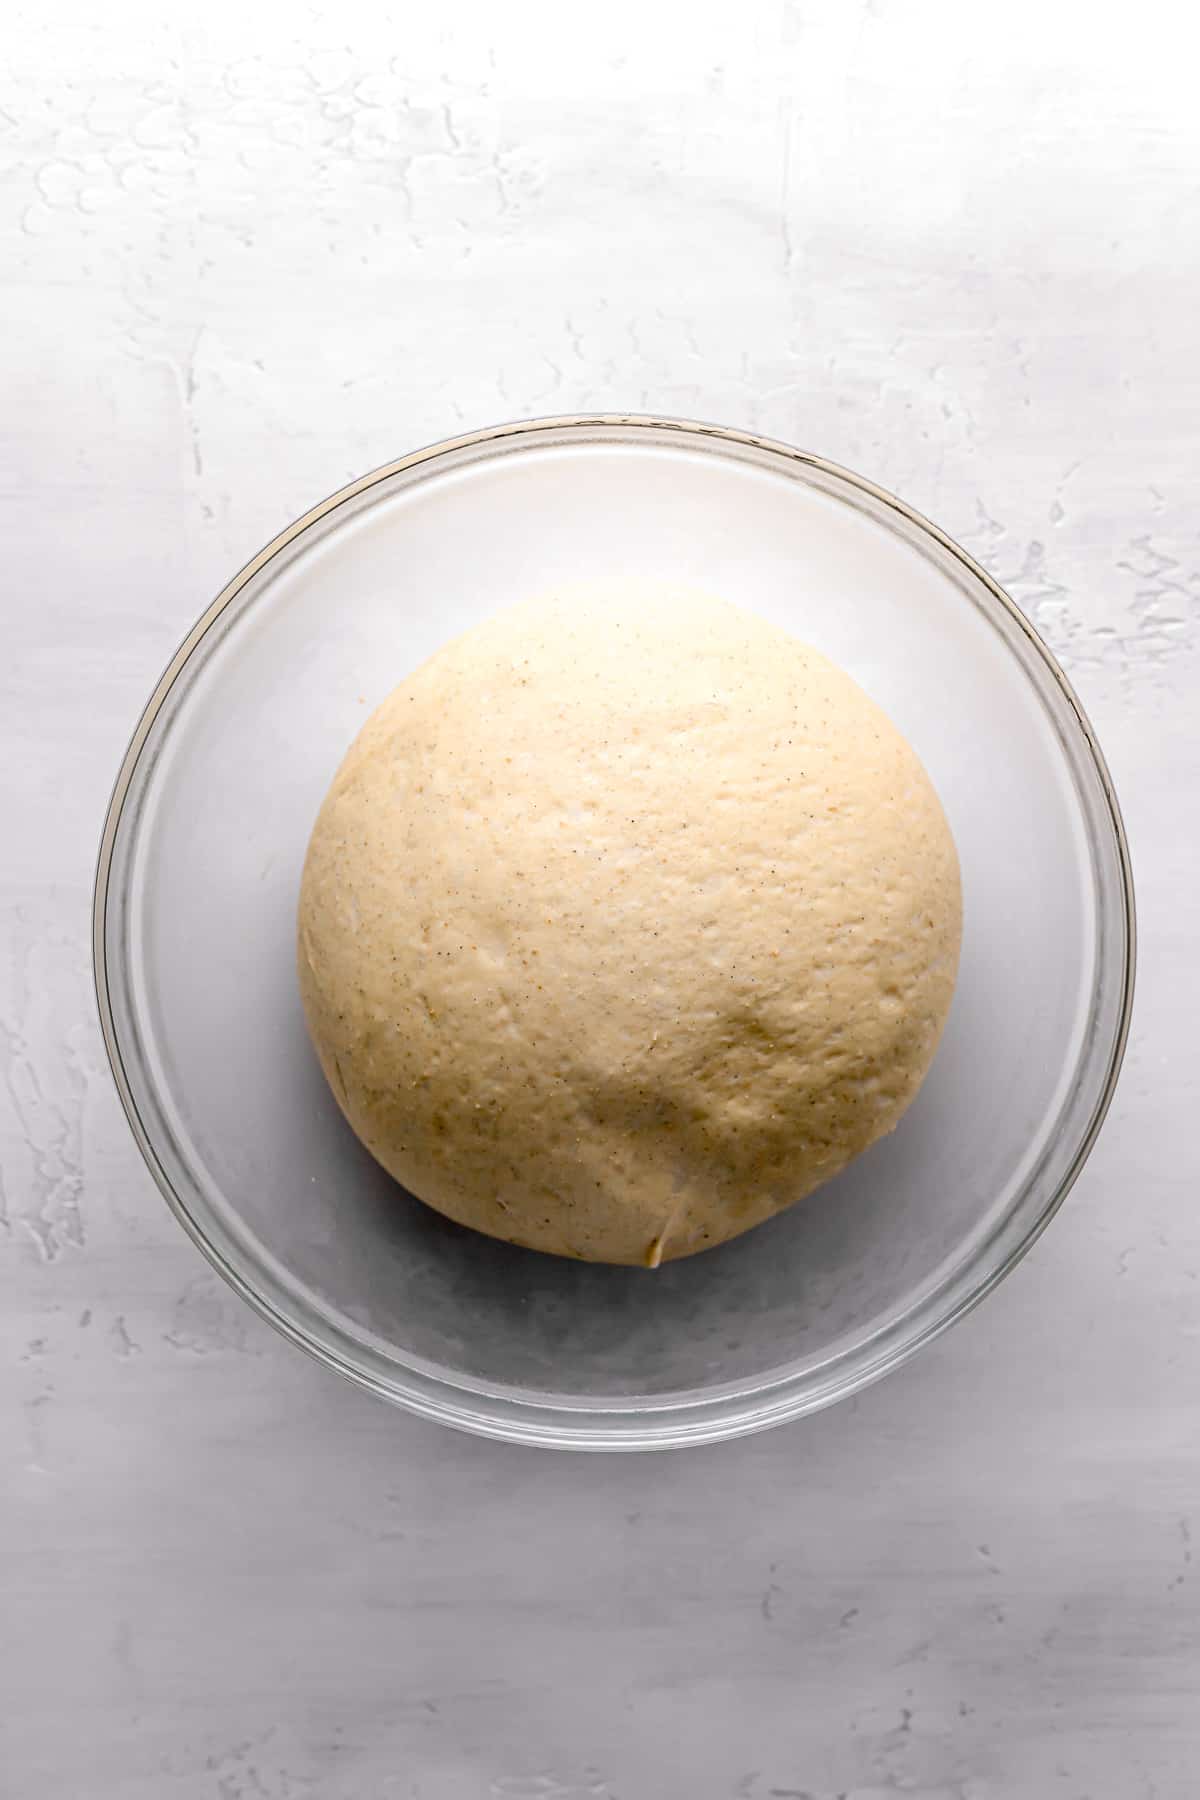 proofed dough in glass bowl.